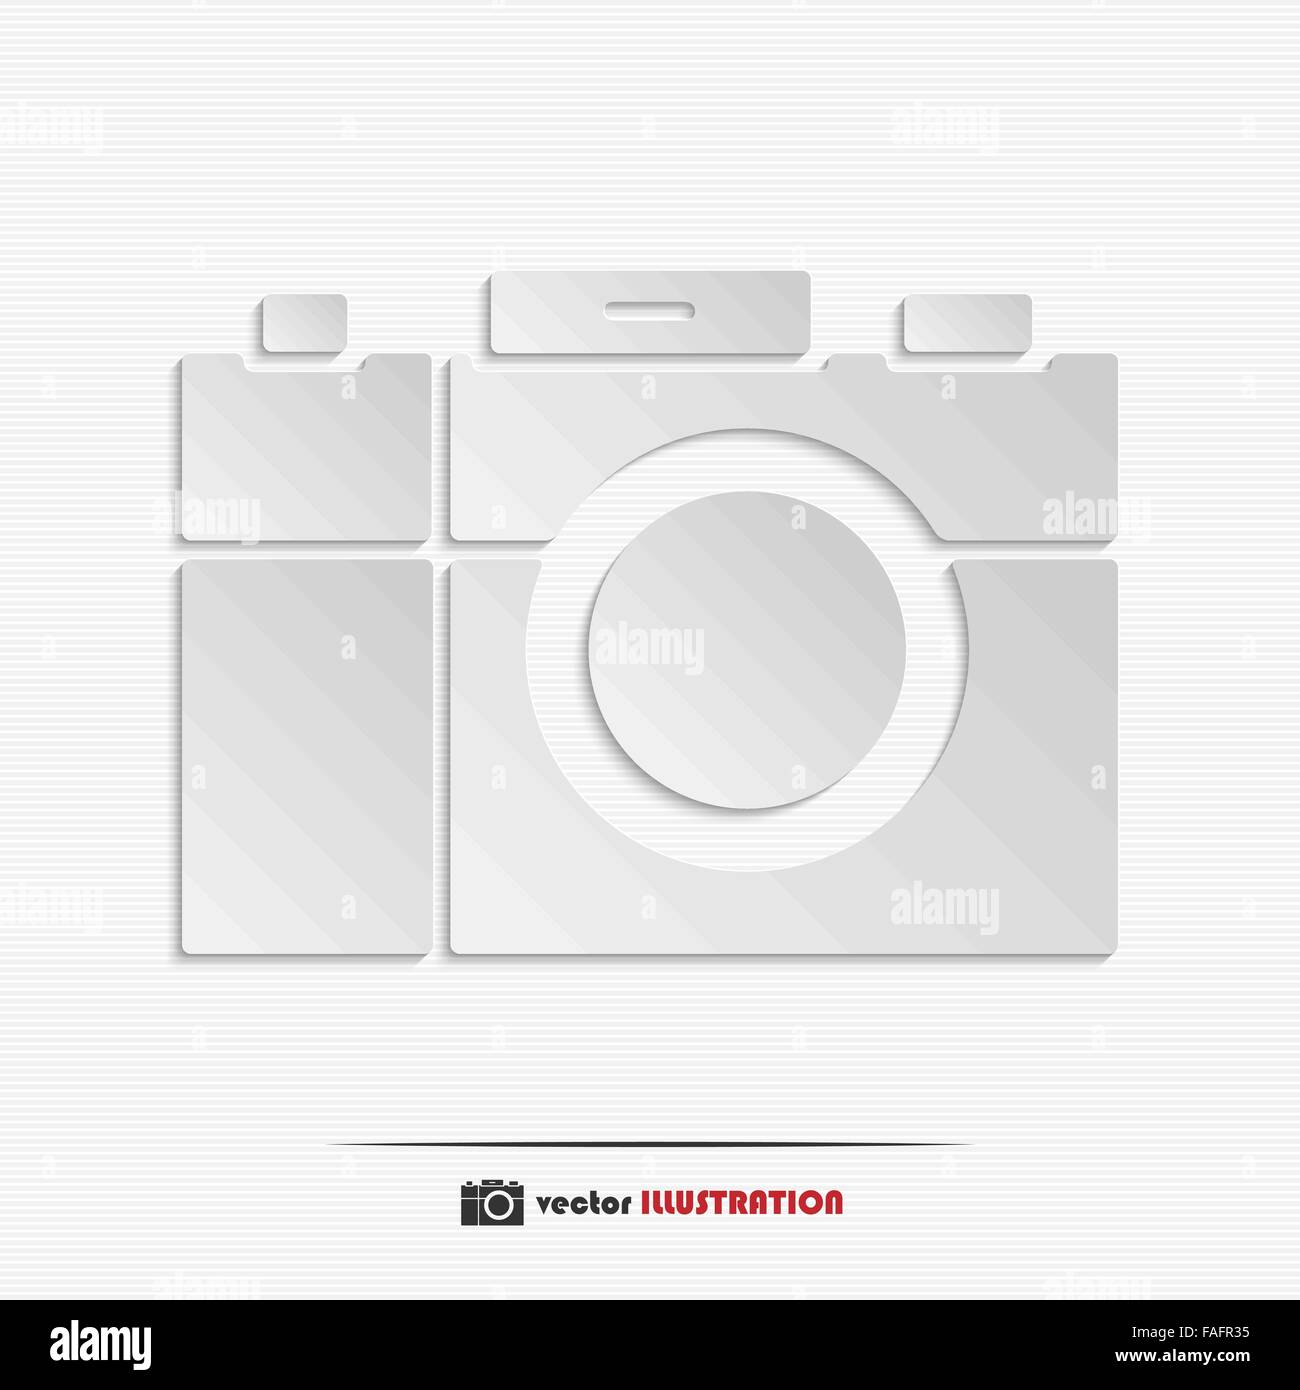 Abstract camera web icon for your design Stock Vector